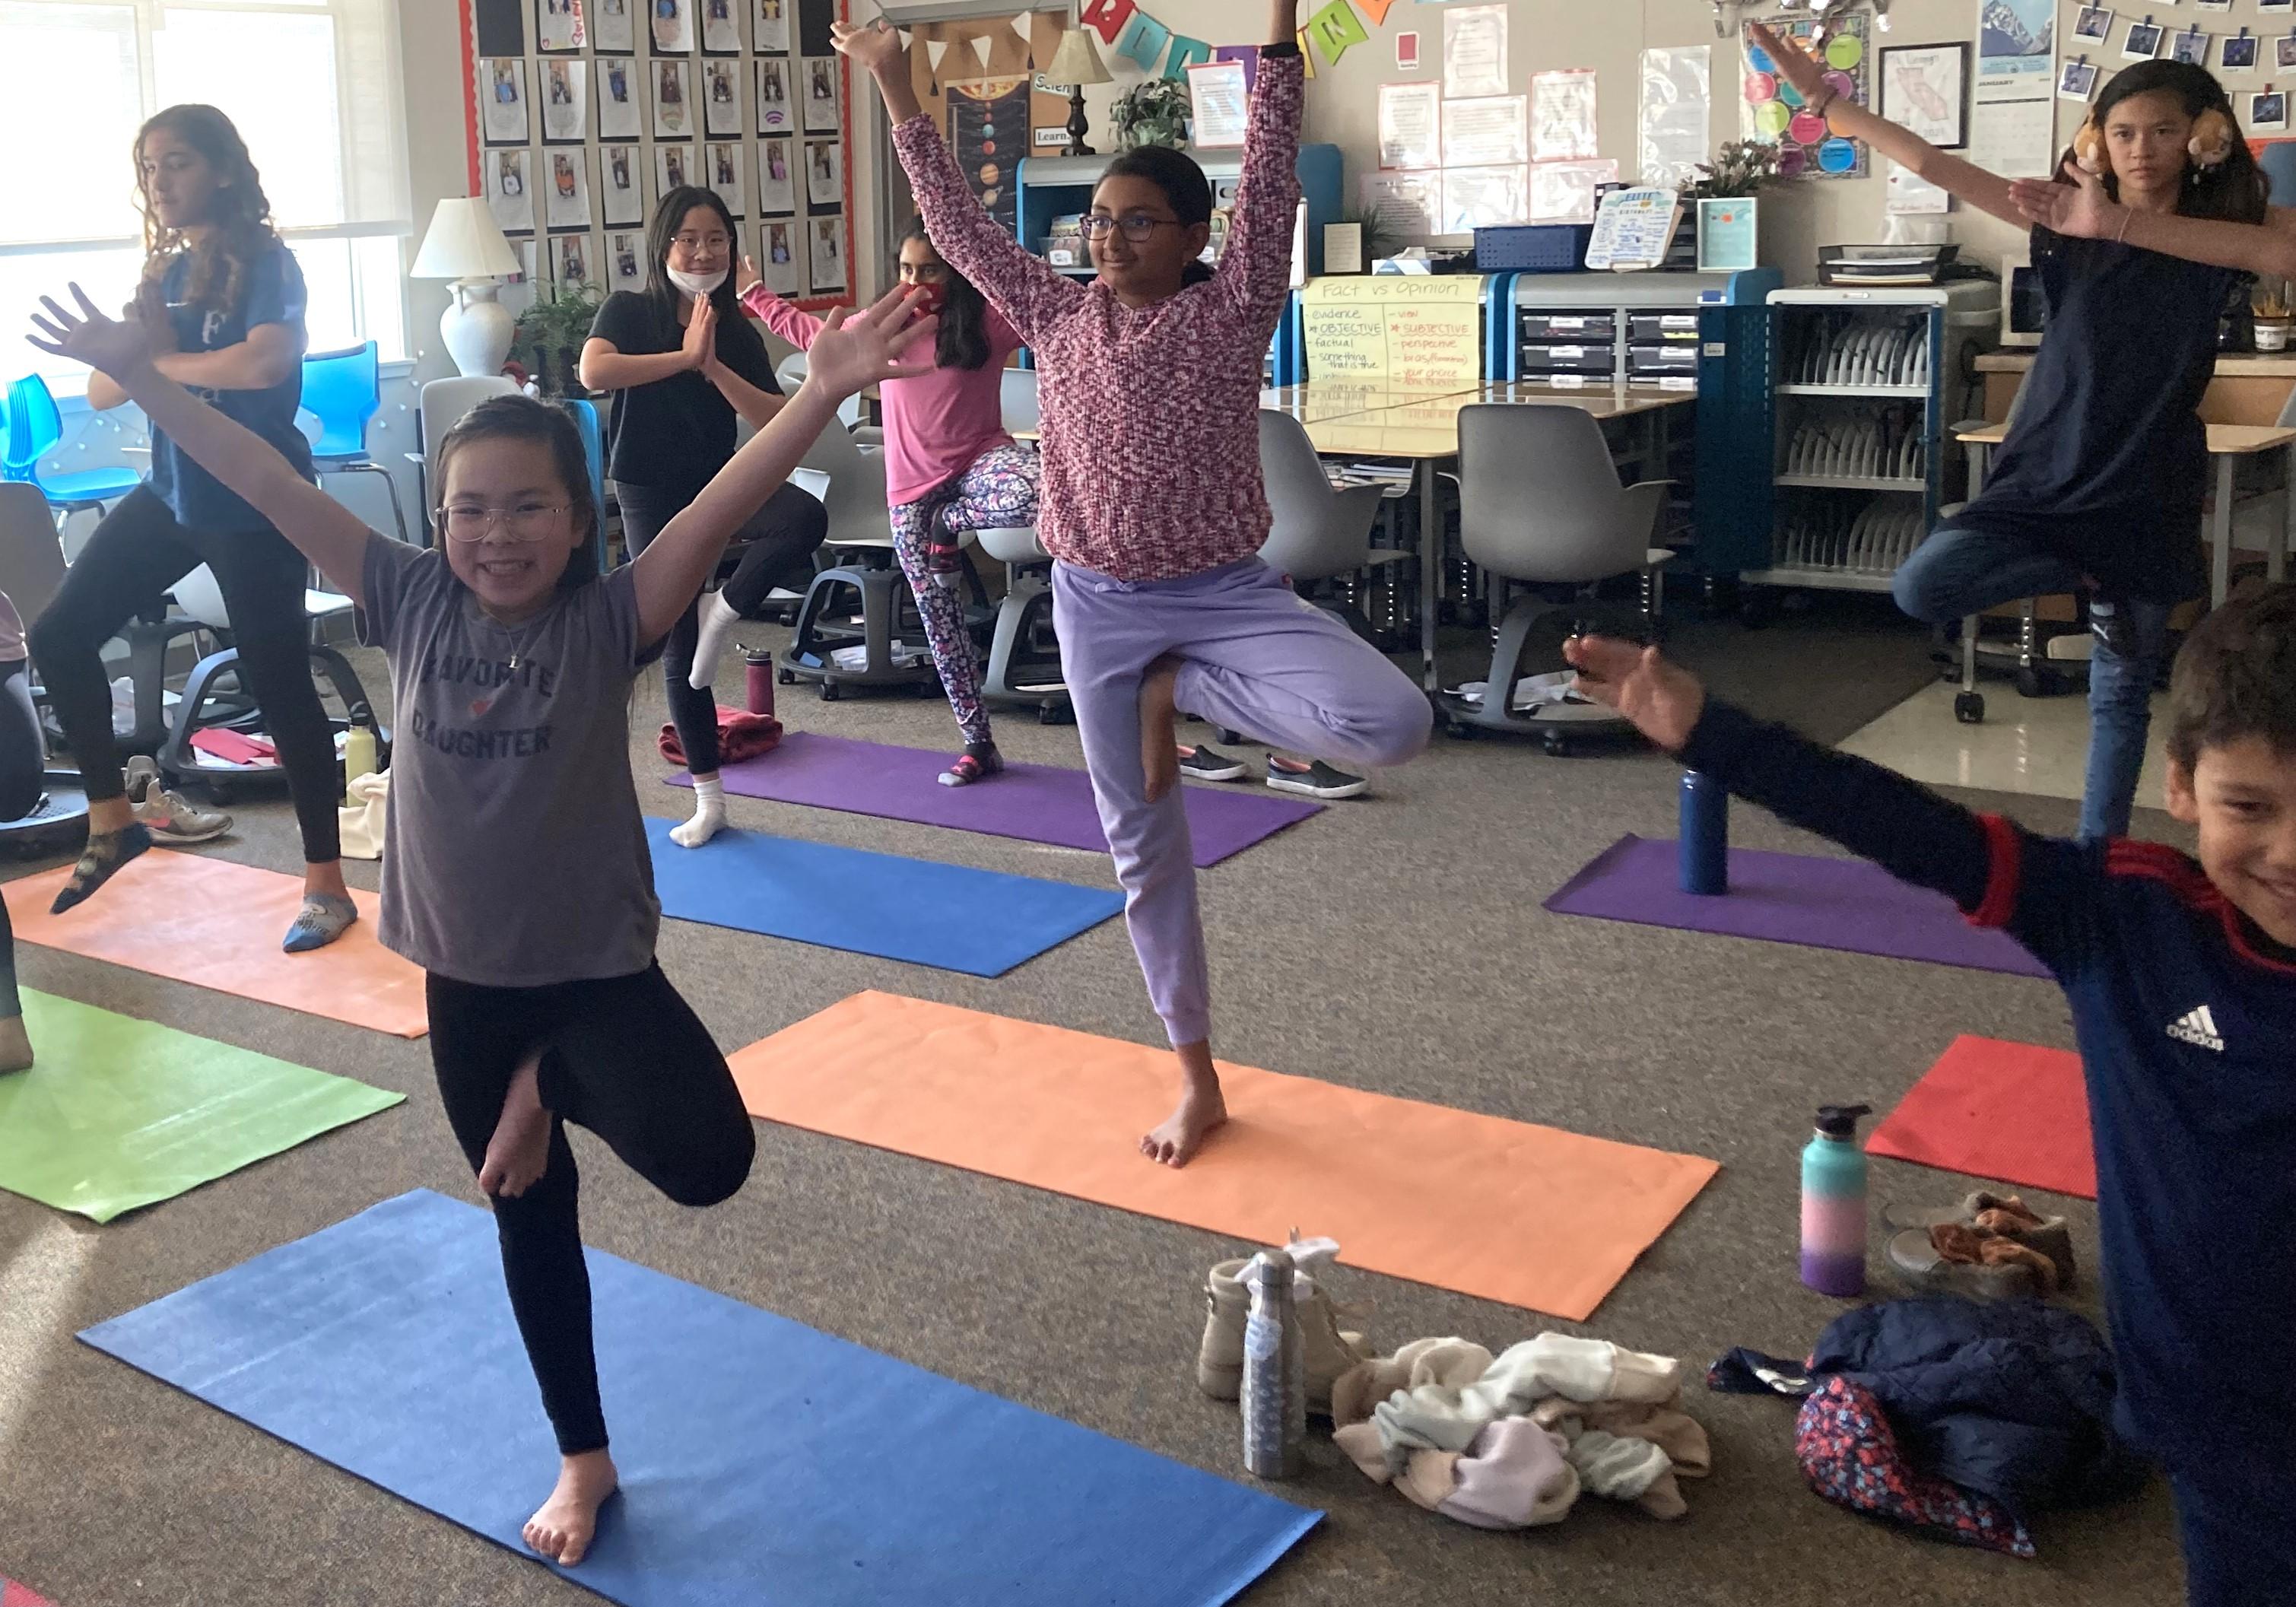 Yoga after school class at Green Elementary